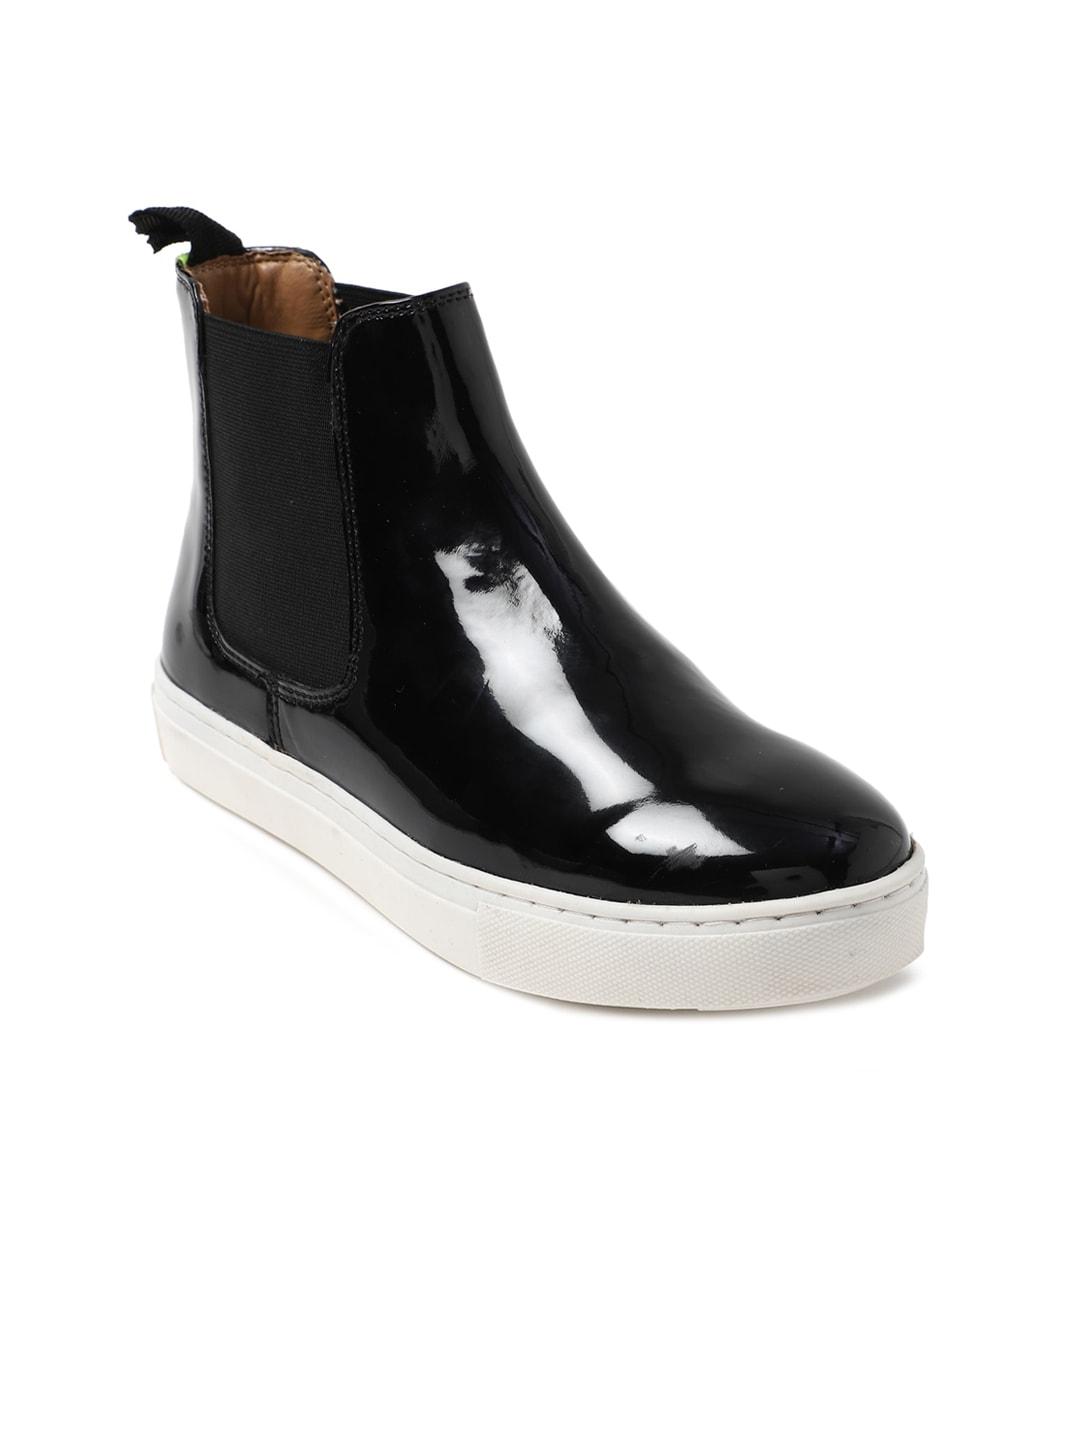 forever-21-women-black-solid-mid-top-pu-flat-boots